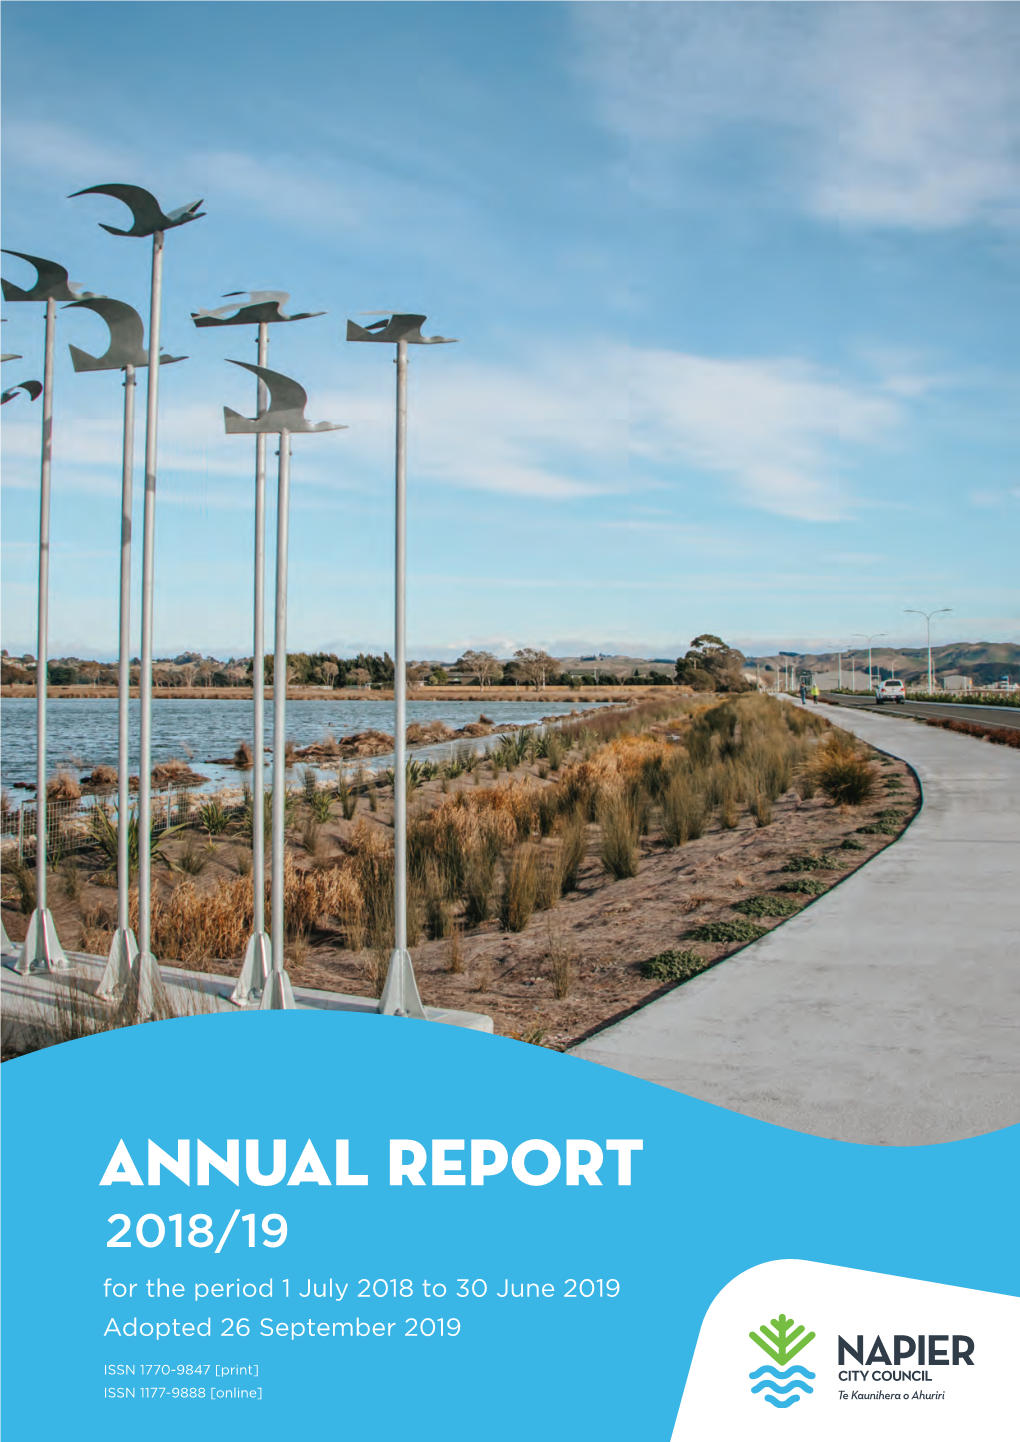 ANNUAL REPORT 2018/19 for the Period 1 July 2018 to 30 June 2019 Adopted 26 September 2019